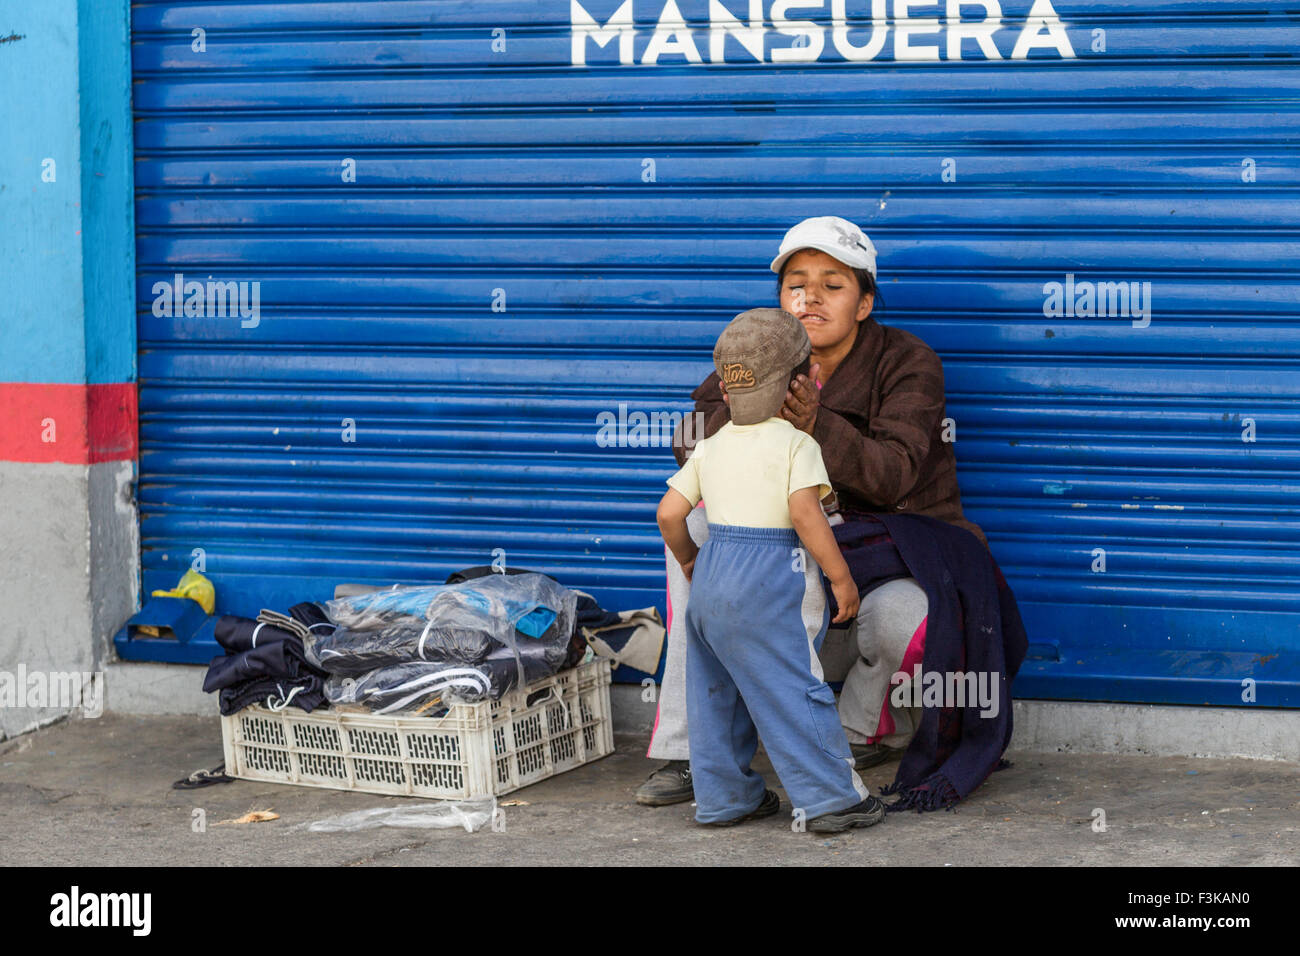 Emotional Moment With A Street Seller Woman Giving Attention To Her Young Son Stock Photo